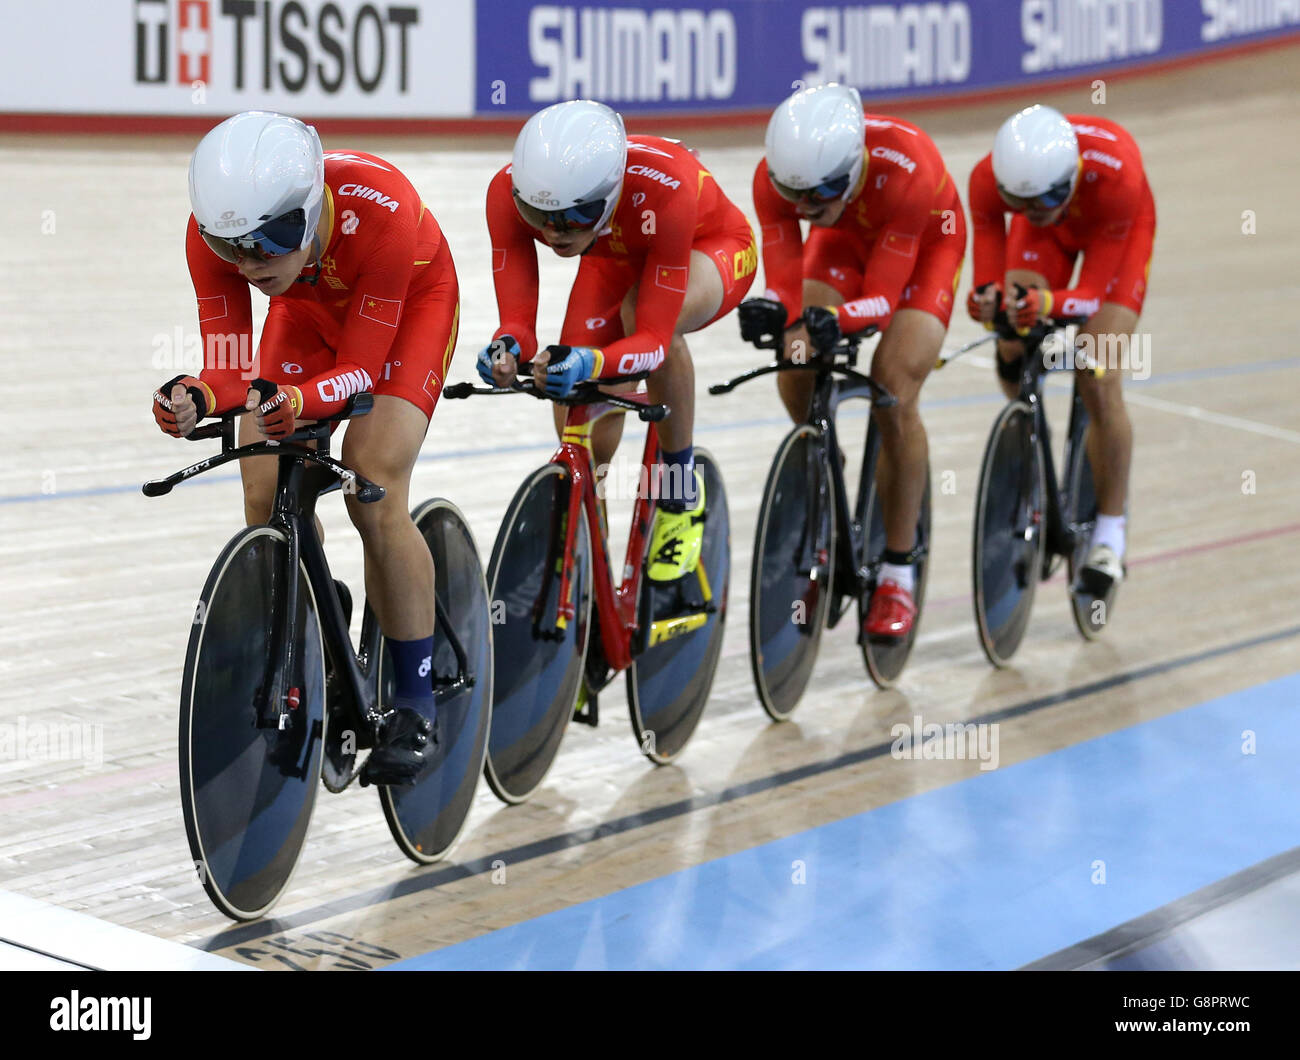 China's (L-R) Chen Lu Qin, Ping An Shen, Yang Fan and Hao Liu compete in the Men's Team Pursuit Qualifying during day one of the UCI Track Cycling World Championships at Lee Valley VeloPark, London. PRESS ASSOCIATION Photo. Picture date: Wednesday March 2, 2016. See PA story CYCLING World. Photo credit should read: Tim Goode/PA Wire. Stock Photo